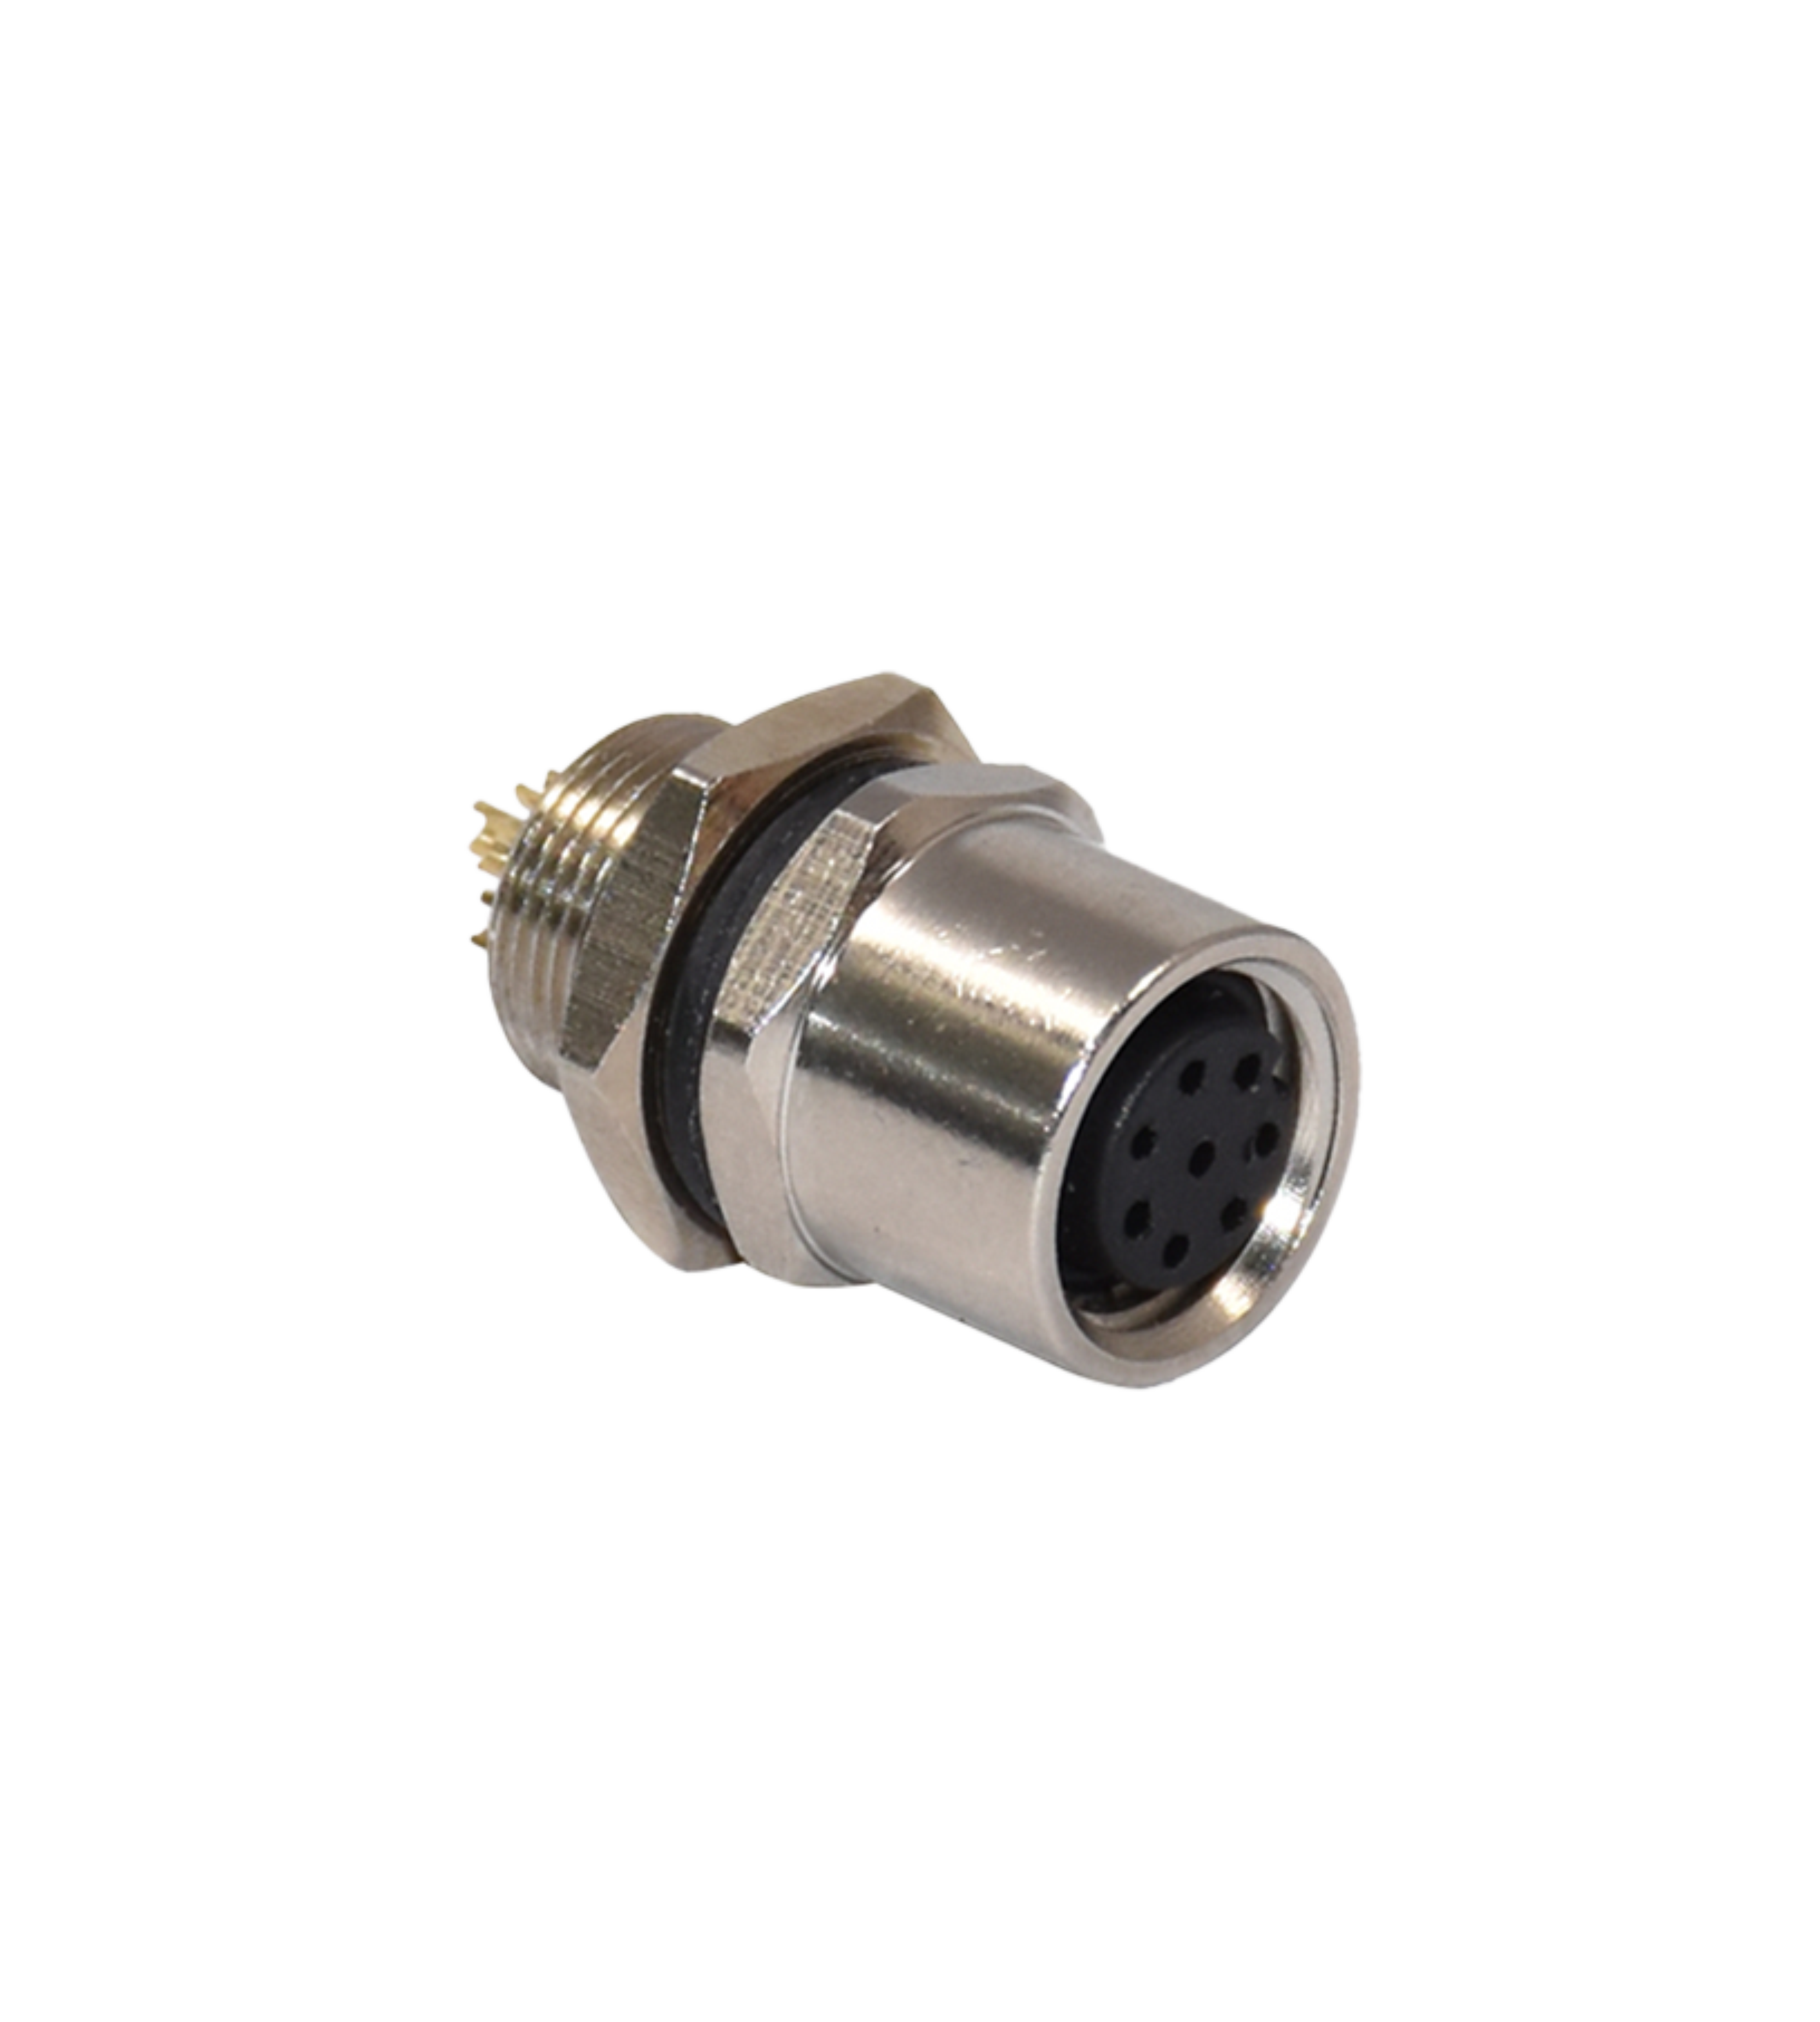 Rigoal's M8 Connector: The Ultimate Solution for Industrial Connectivity